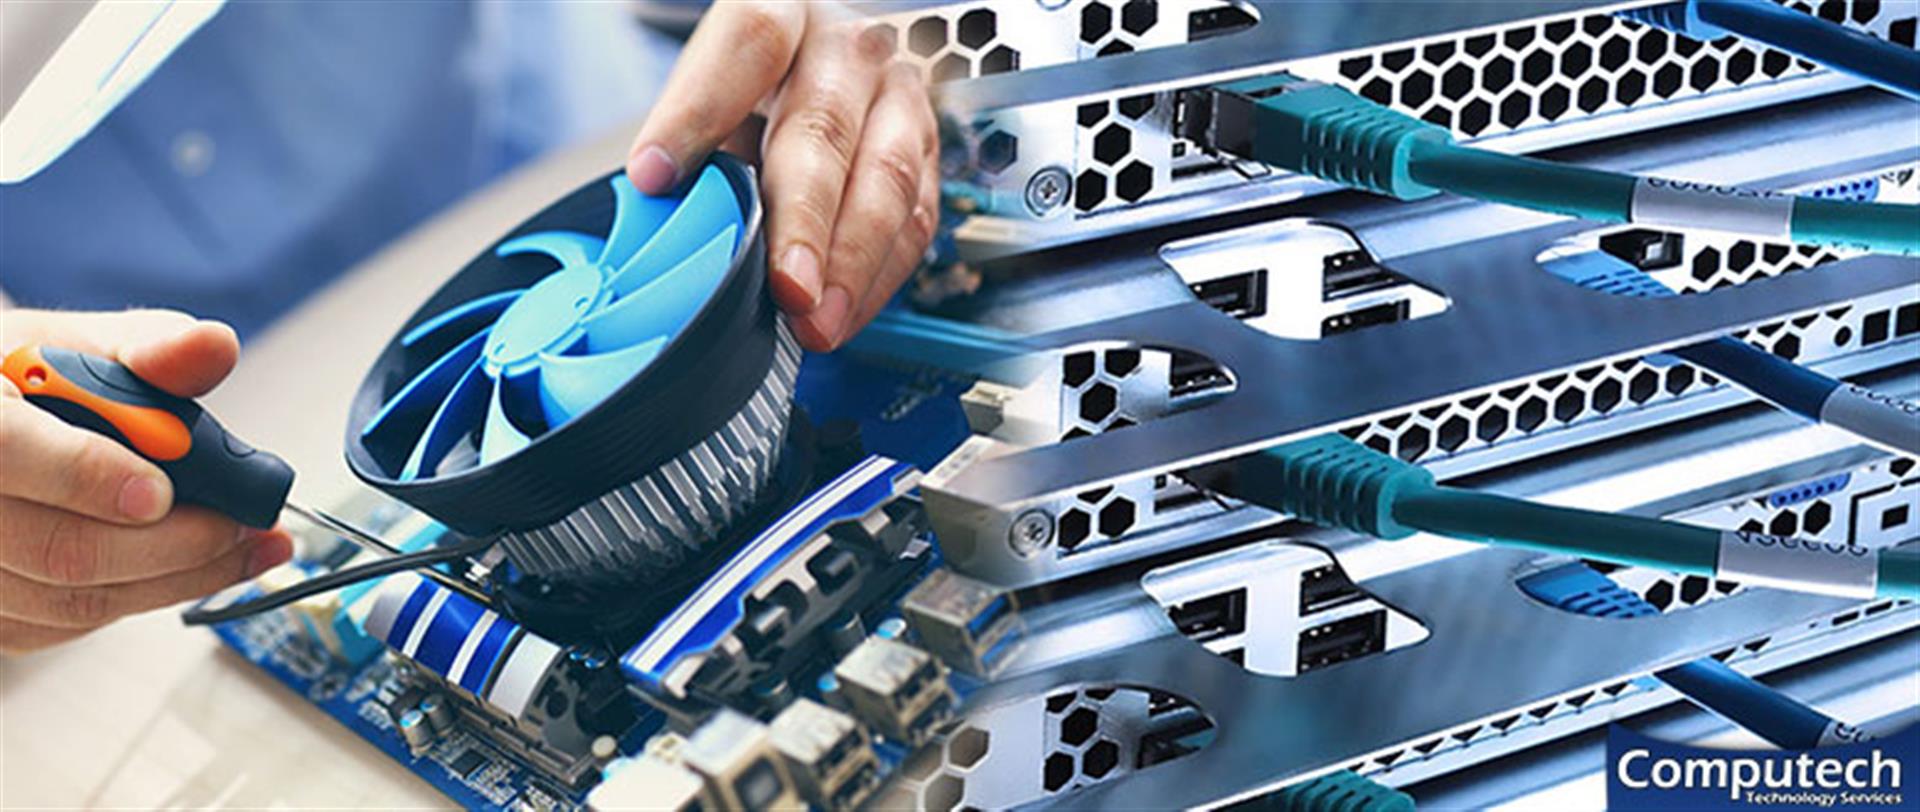 Richmond Hill Georgia On-Site Computer & Printer Repairs, Networks, Voice & Data Cabling Services